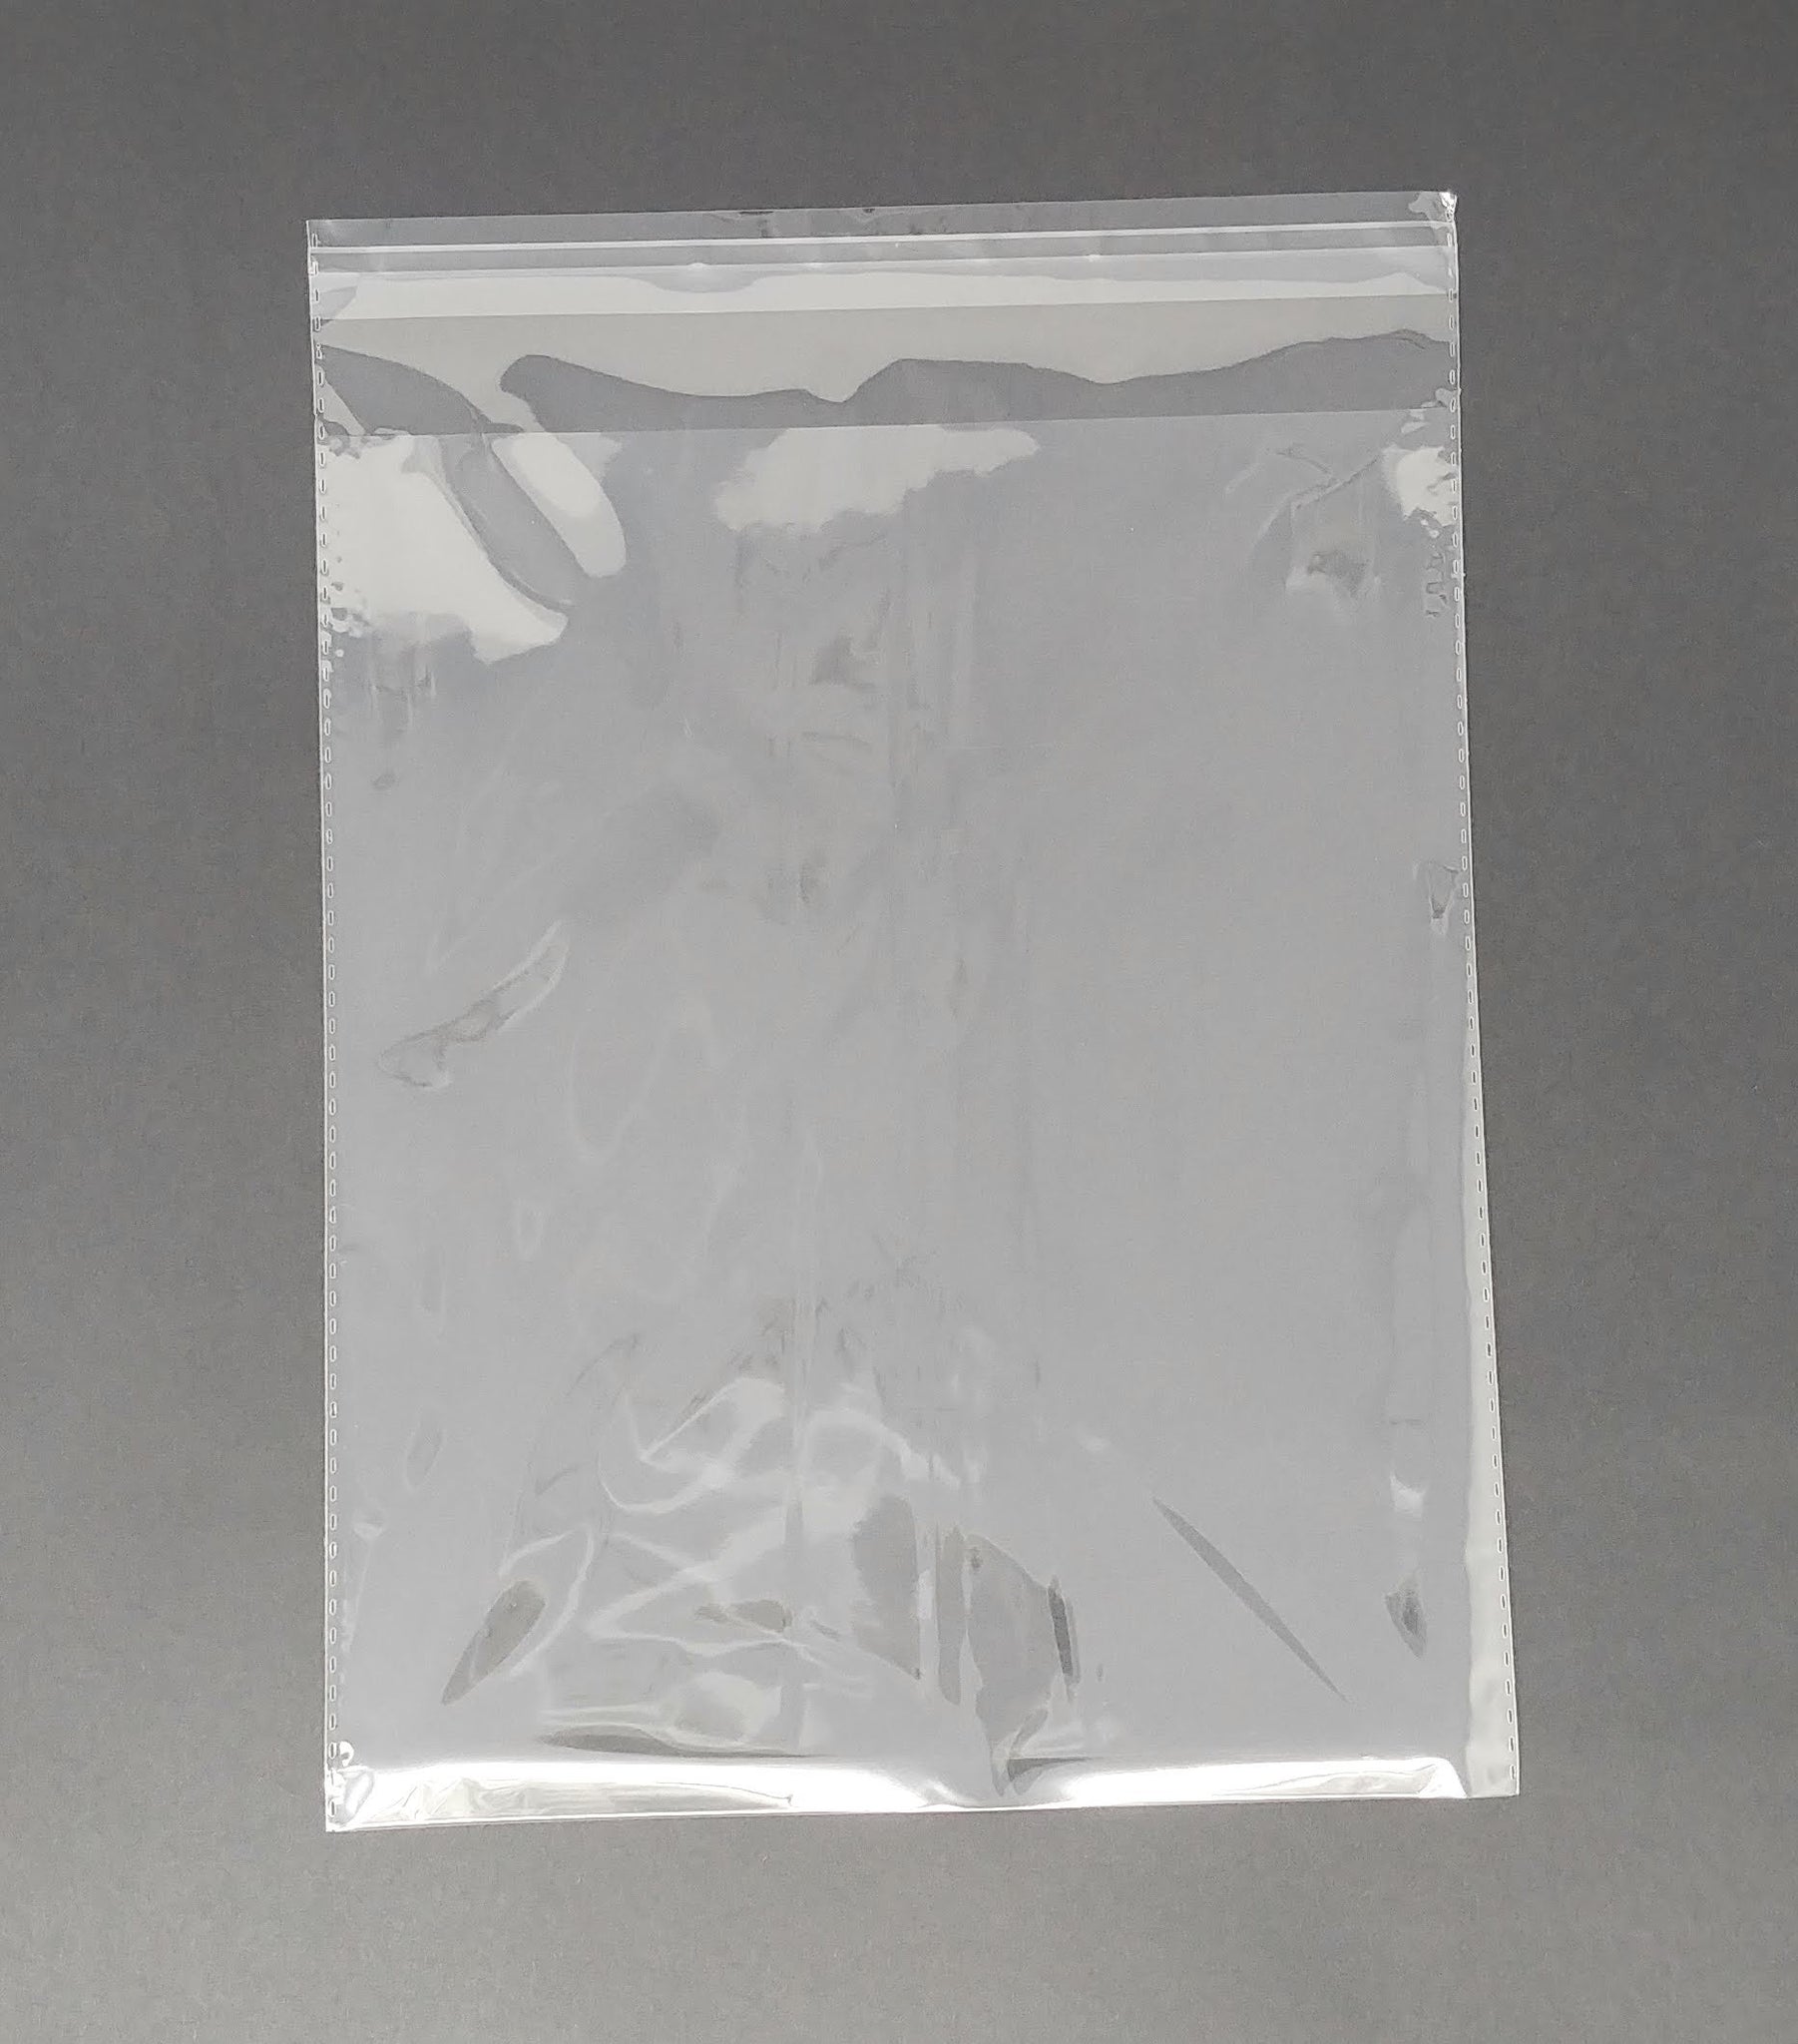 7 Sizes Crystal Clear Self Seal Transparent Plastic Cellophane Poly Bags,  Cookies, Candy, Gifts, Merchandise, Tshirts, Storage Bags 1.5 Mil 